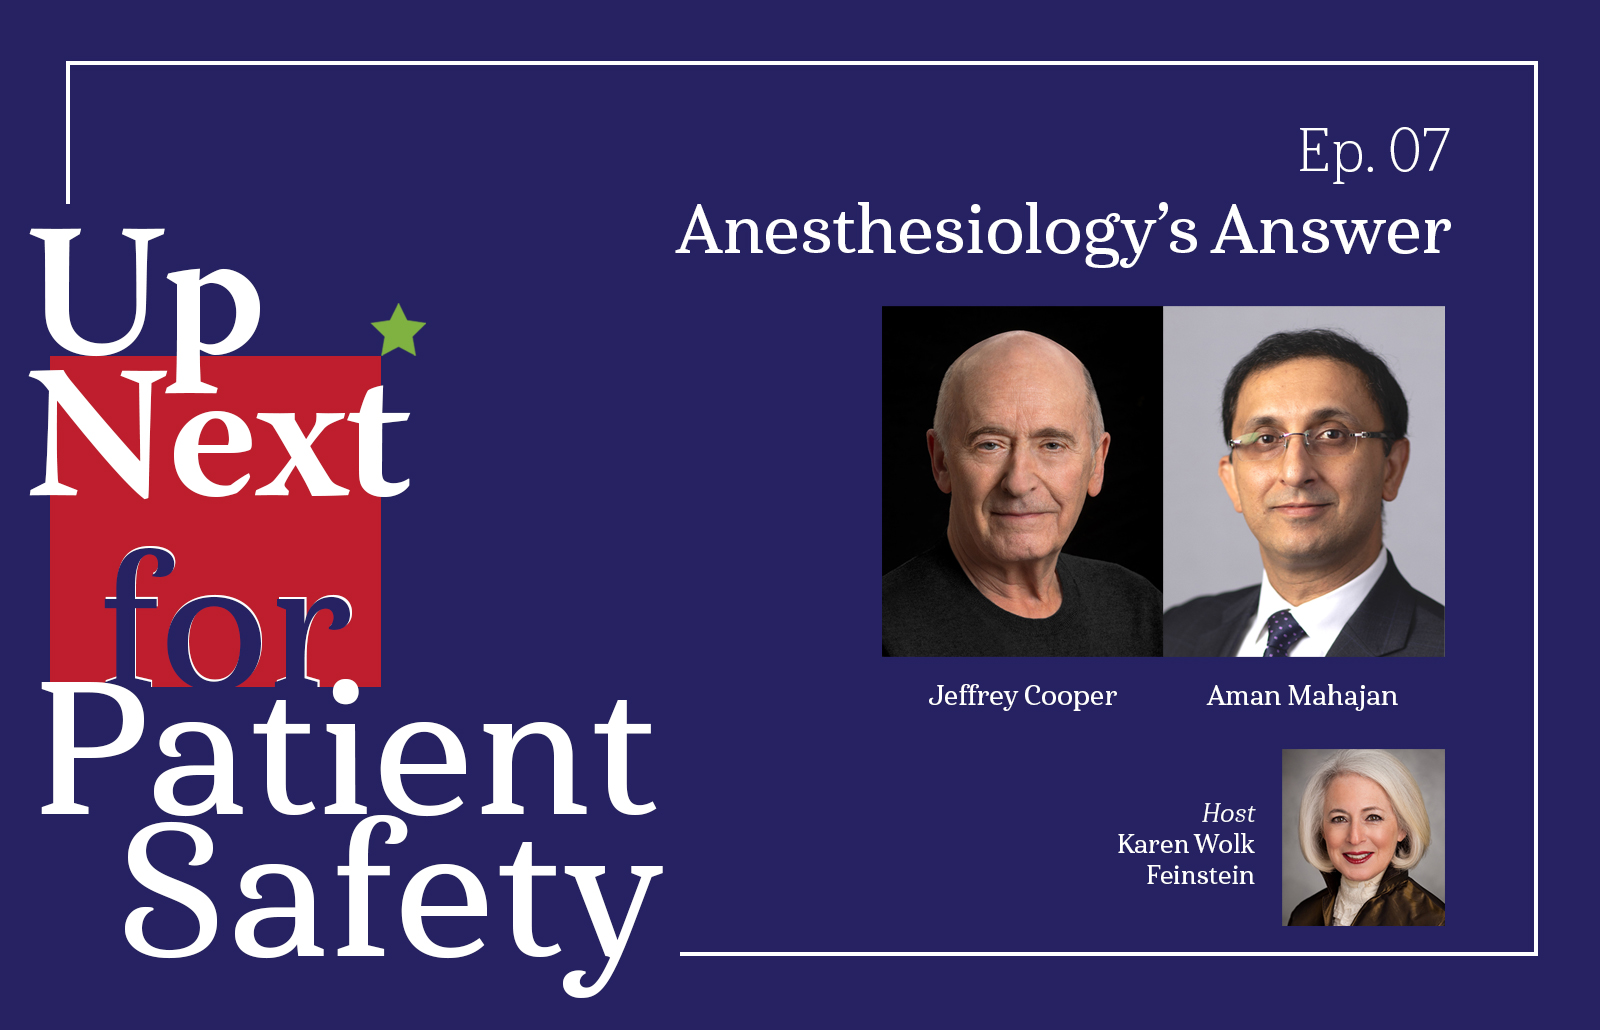 Up Next for Patient Safety Episode 7: Anesthesiology's Answer